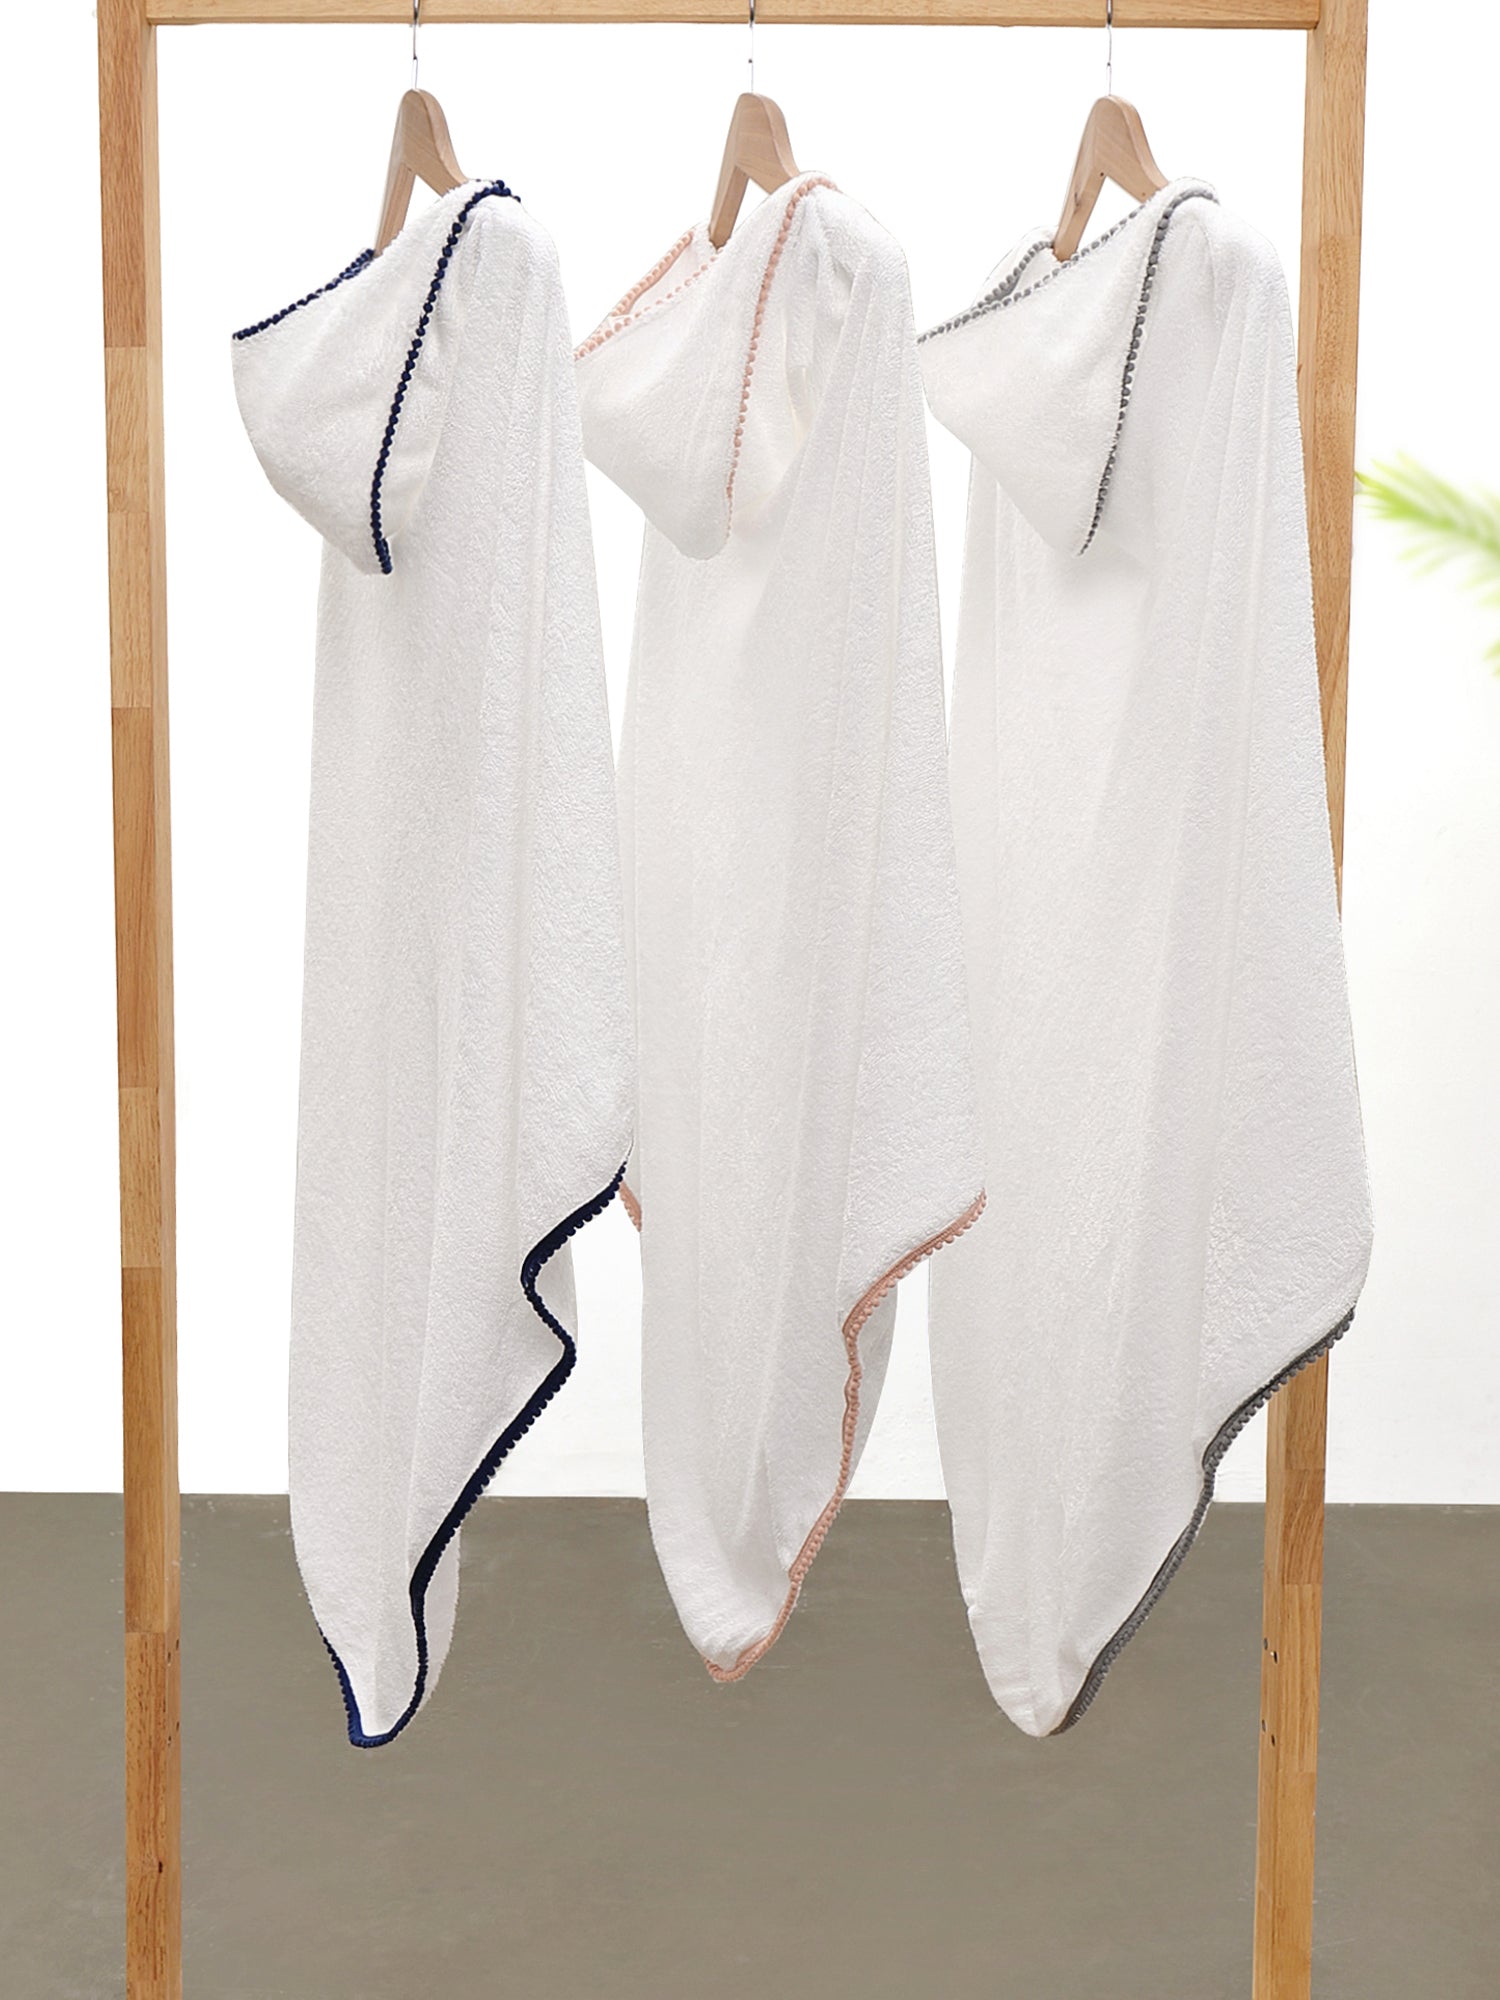 3 white malabar baby bamboo cotton towels hanging on a wooden rack. The towels are white and silky soft and have a hood. They also have a detailed pom pom trim. The towels are extra large and fit from newborns - toddlers 5 years old. Pom Pom colors are; n